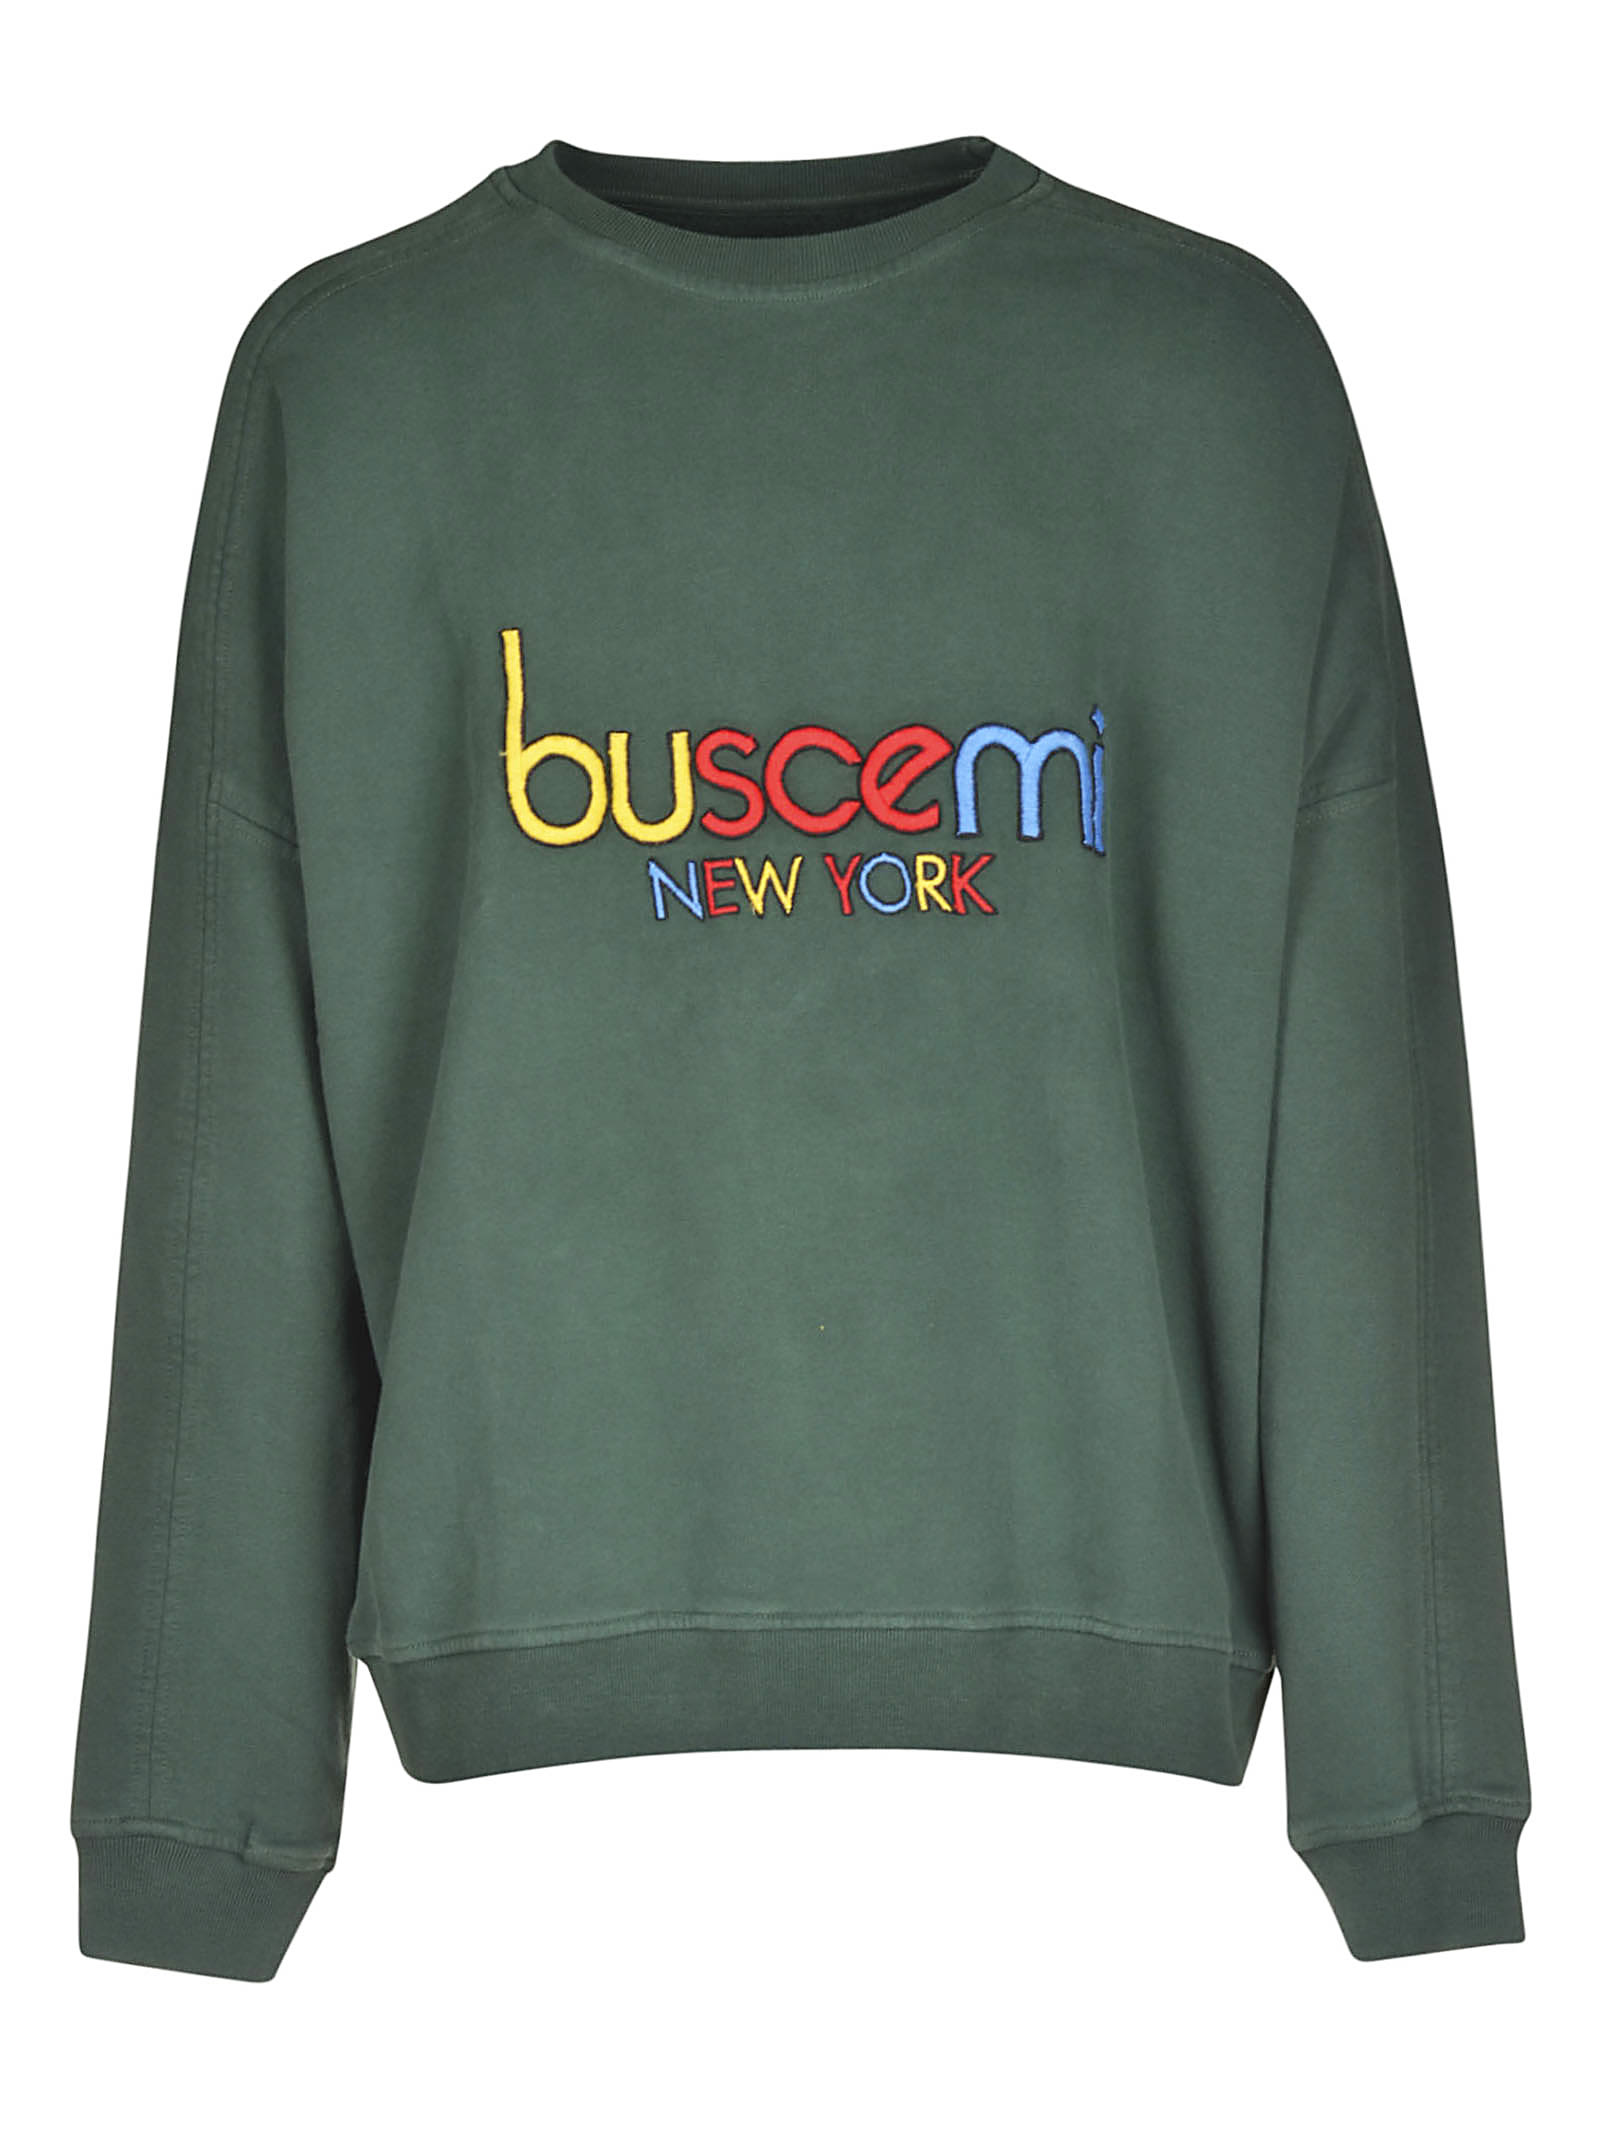 buscemi clothing